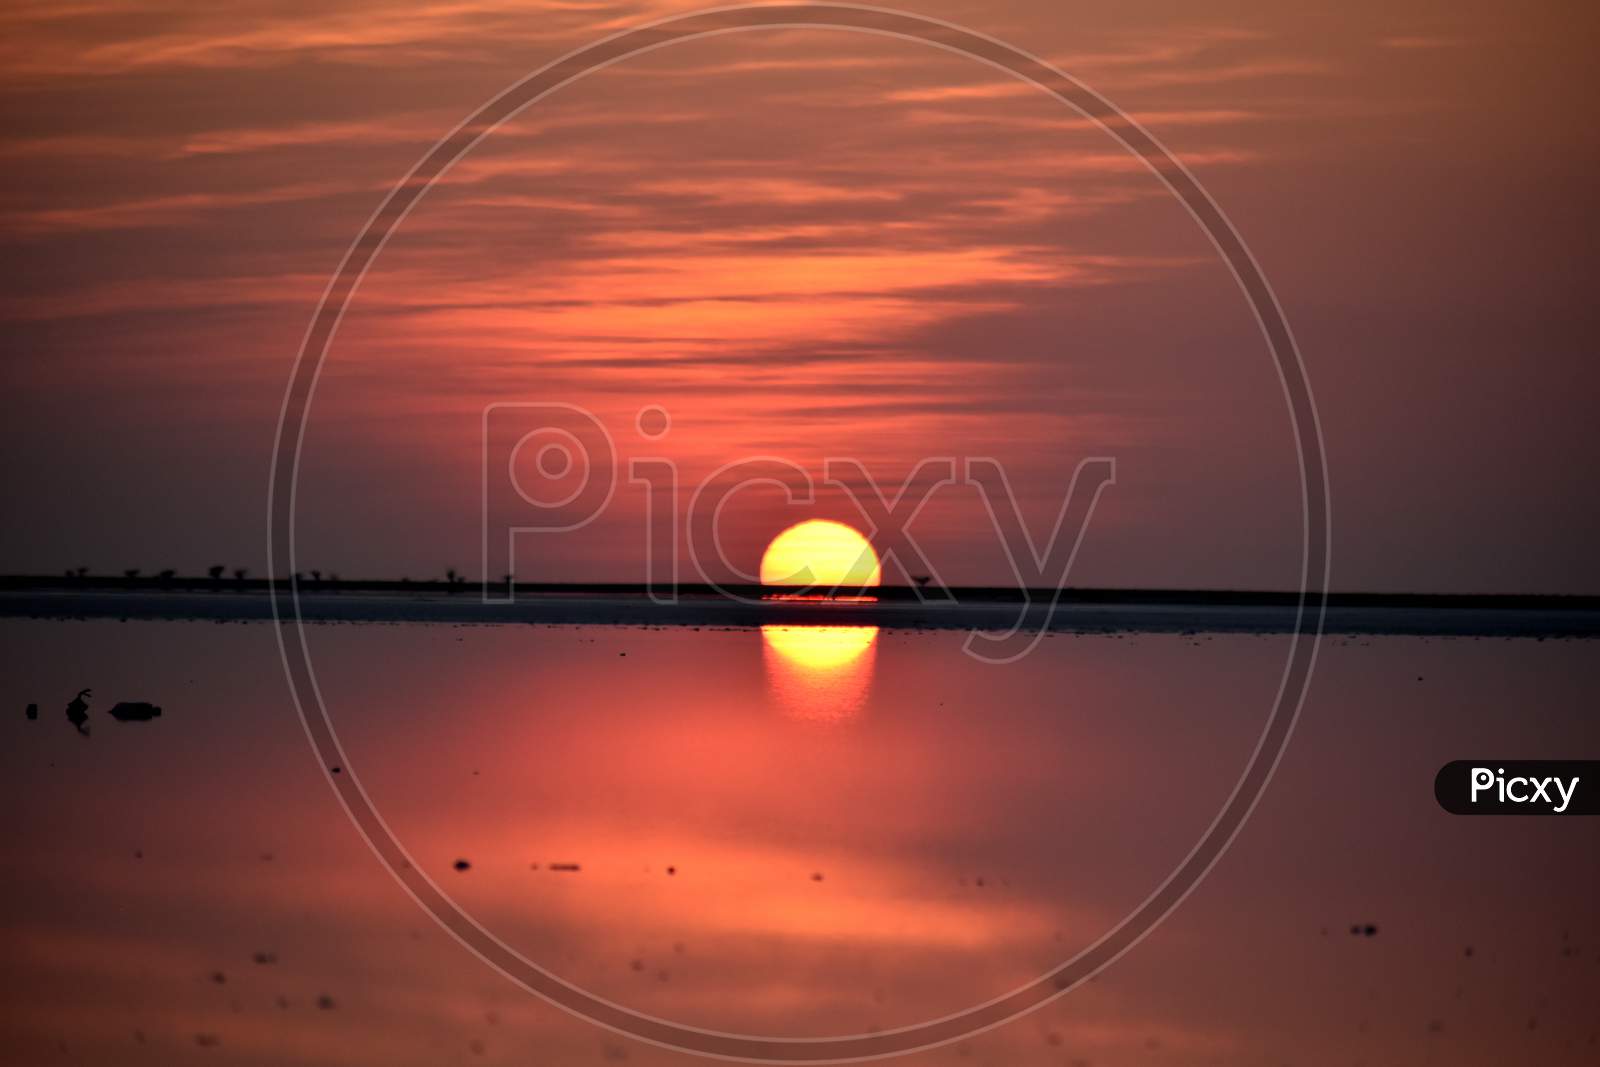 Sunset Panoramas in the Rann of Kutch